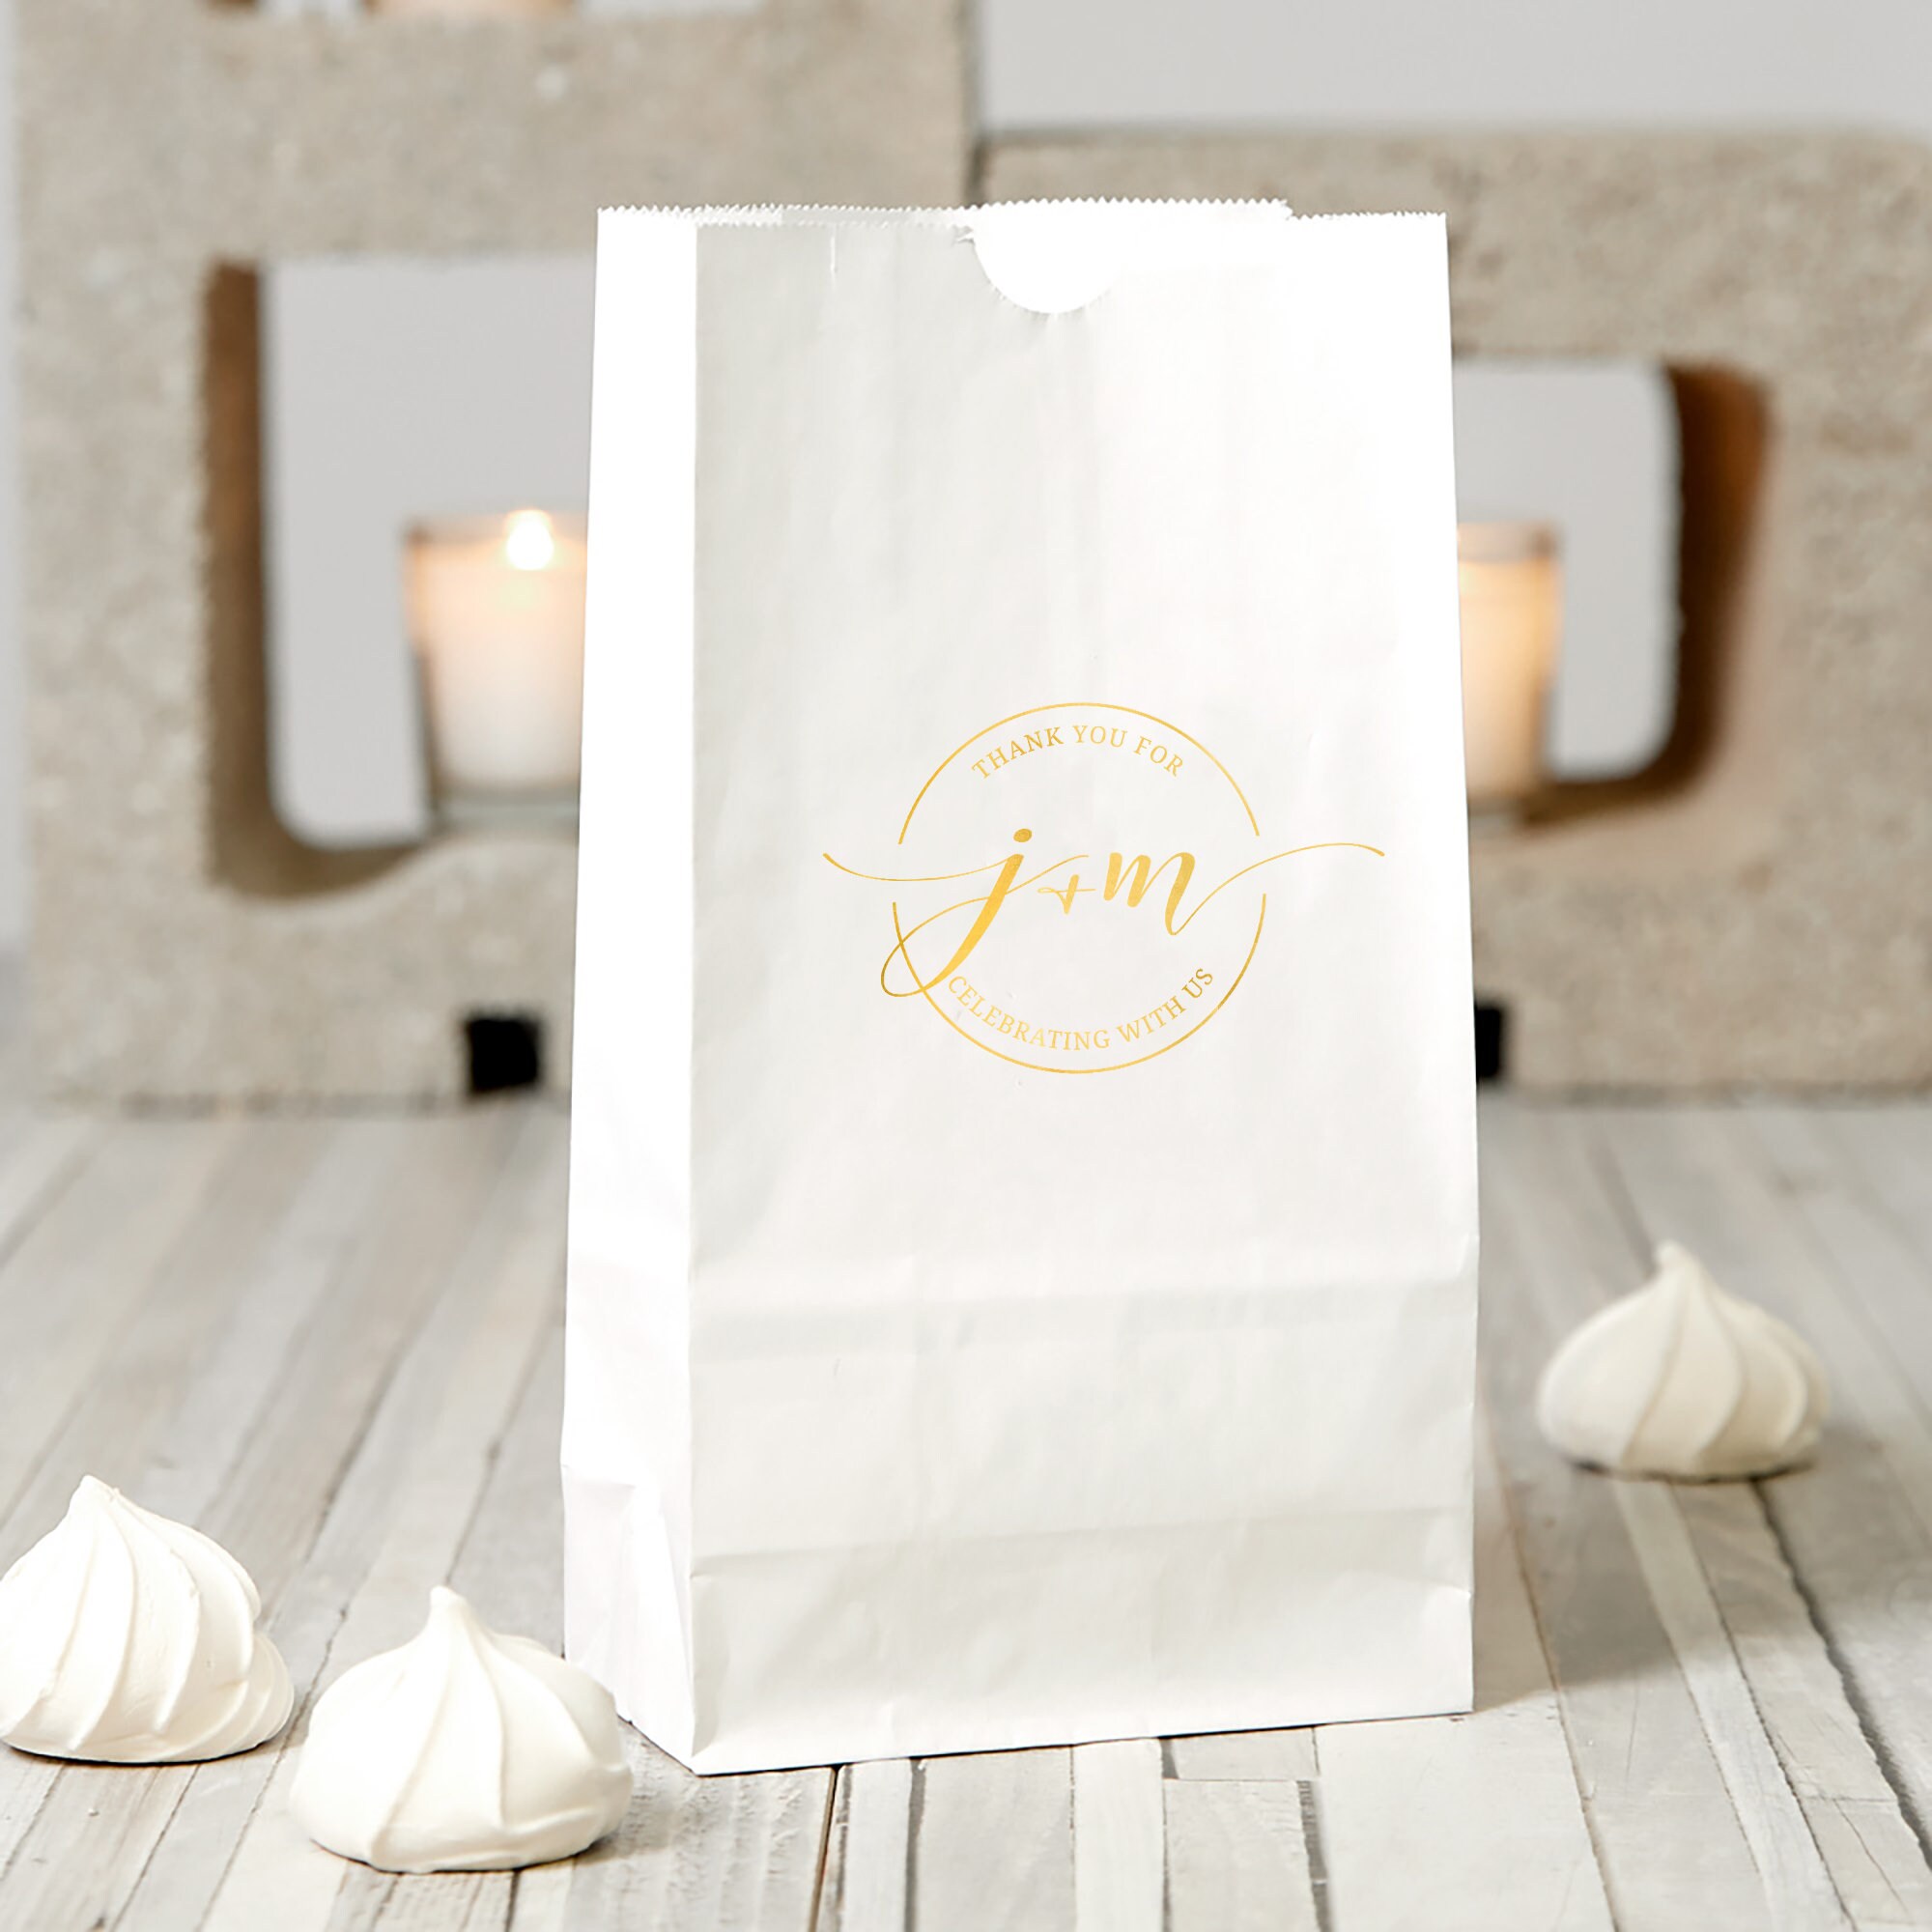 Custom Jewelry Packaging Pouch Personalized Wedding Favor Gift Bags (BG140,  Pack of 100, Light Gray)